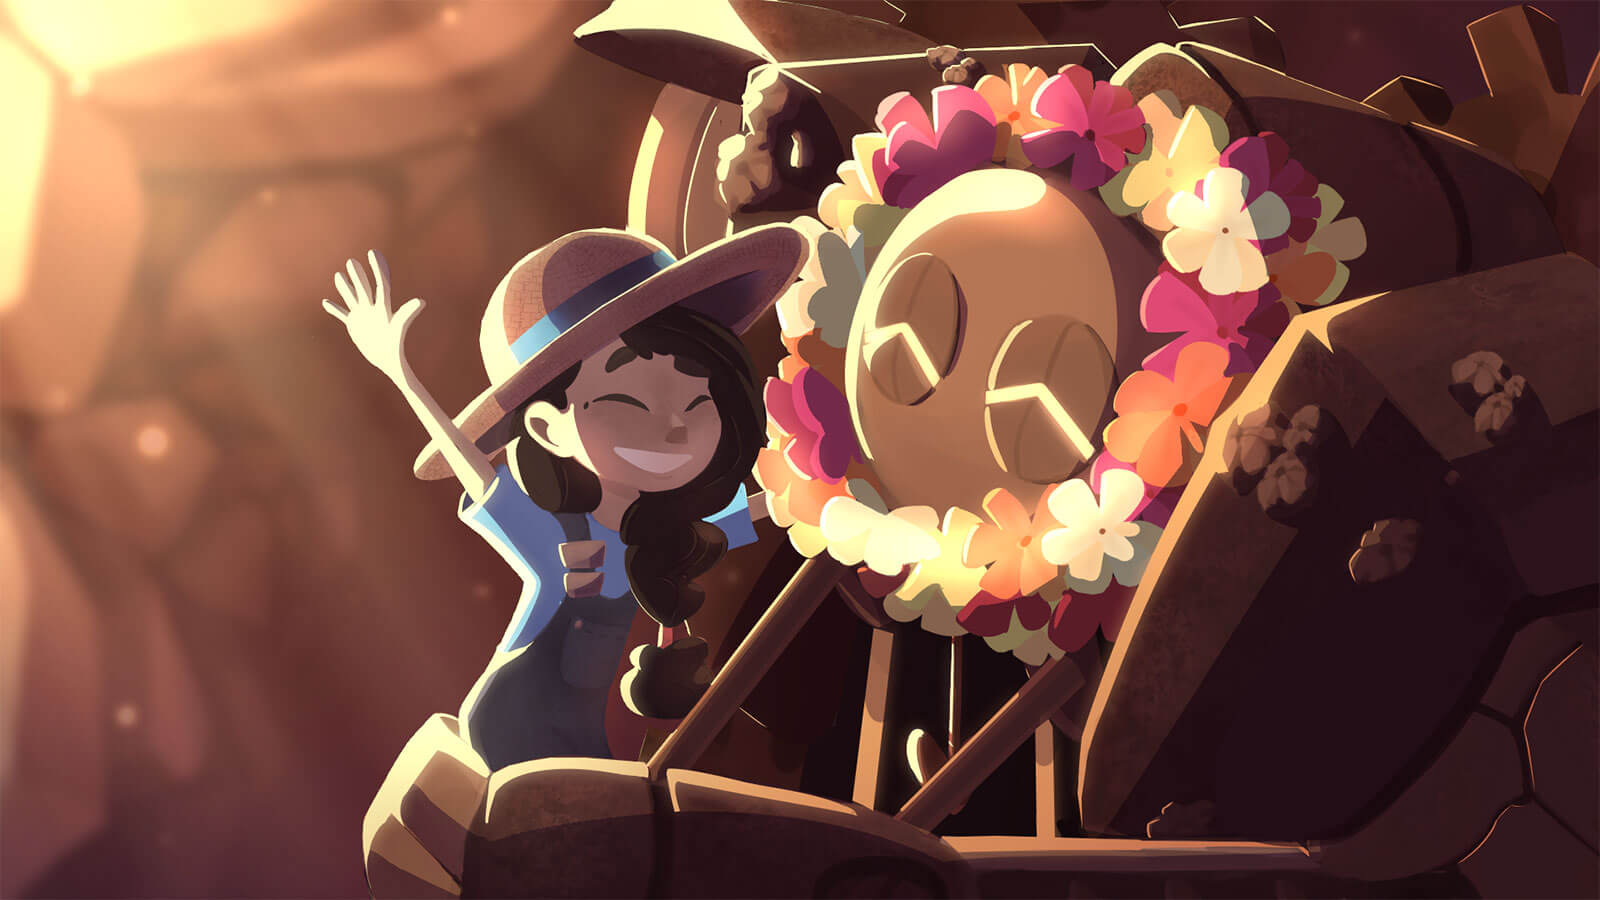 Smiling girl puts a flower garland on a robot